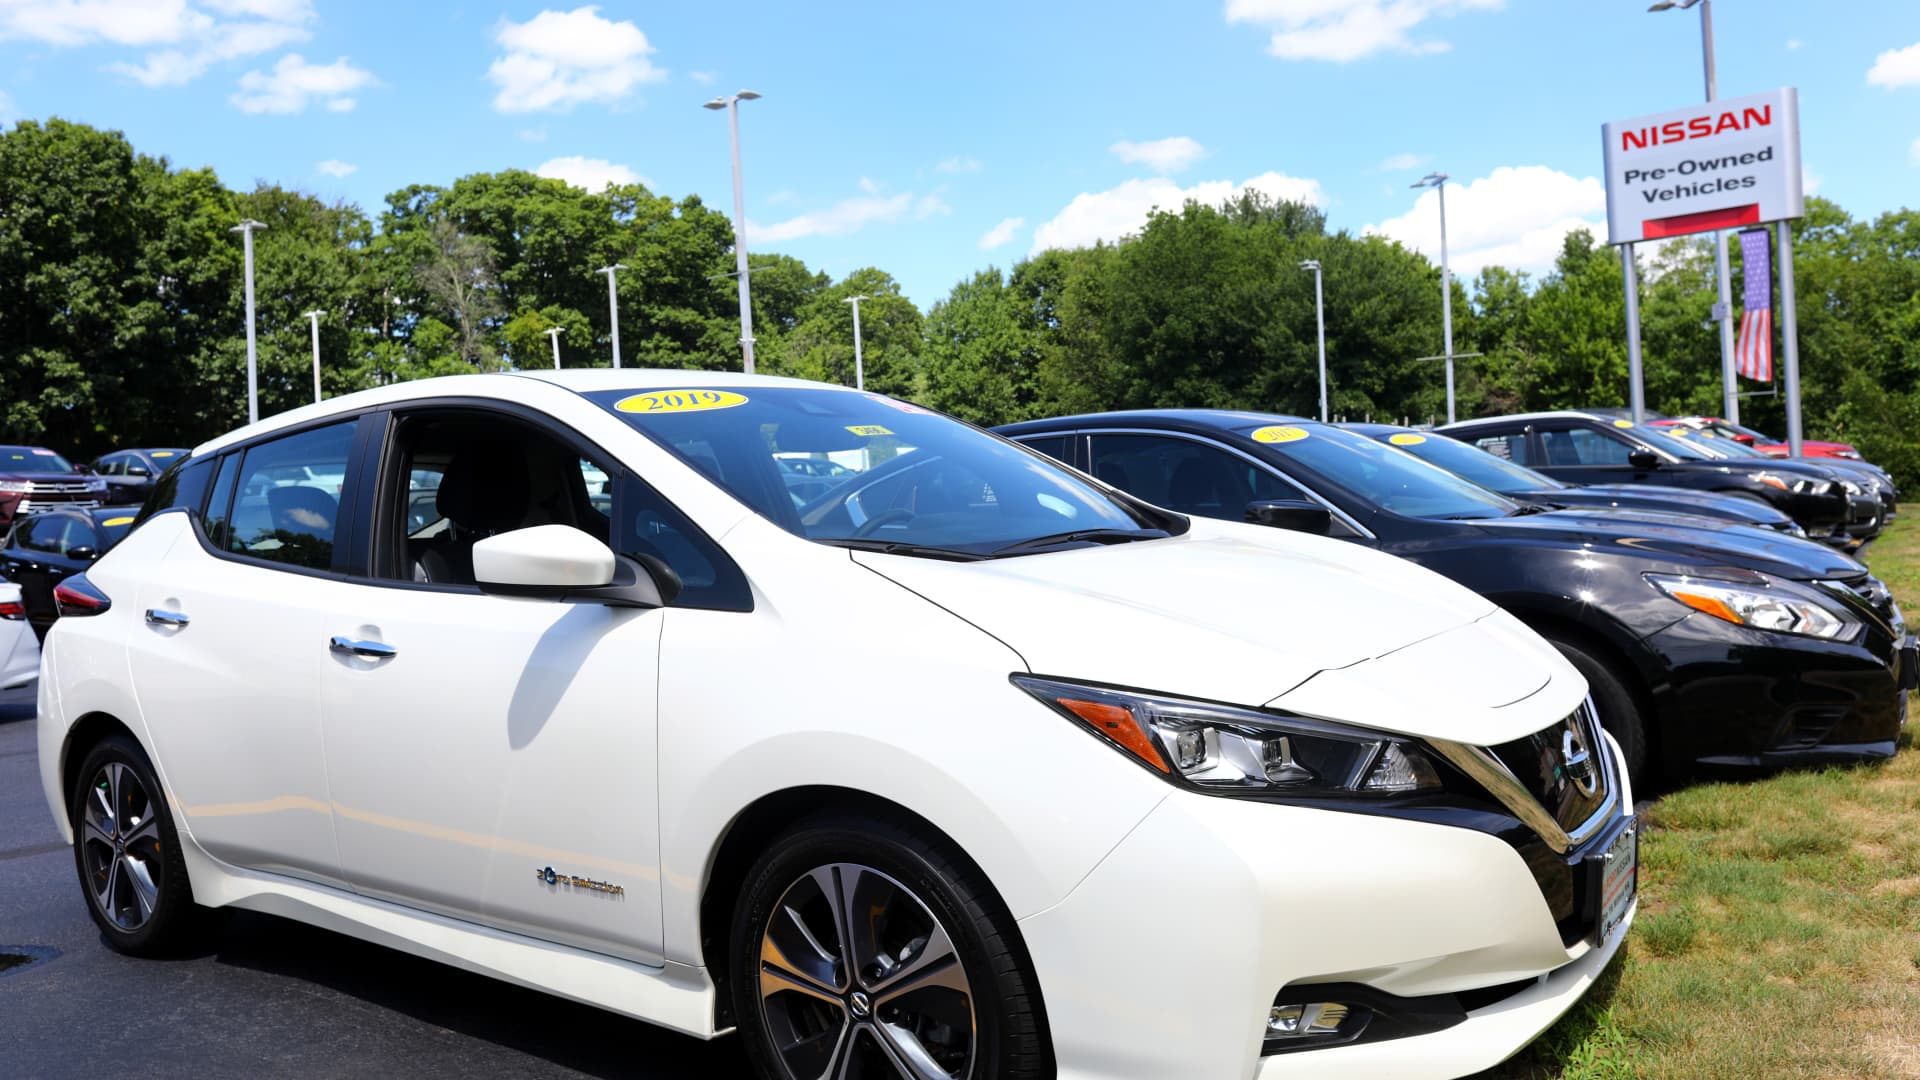 What to know about buying a used electric vehicle as more hit the auto sales market